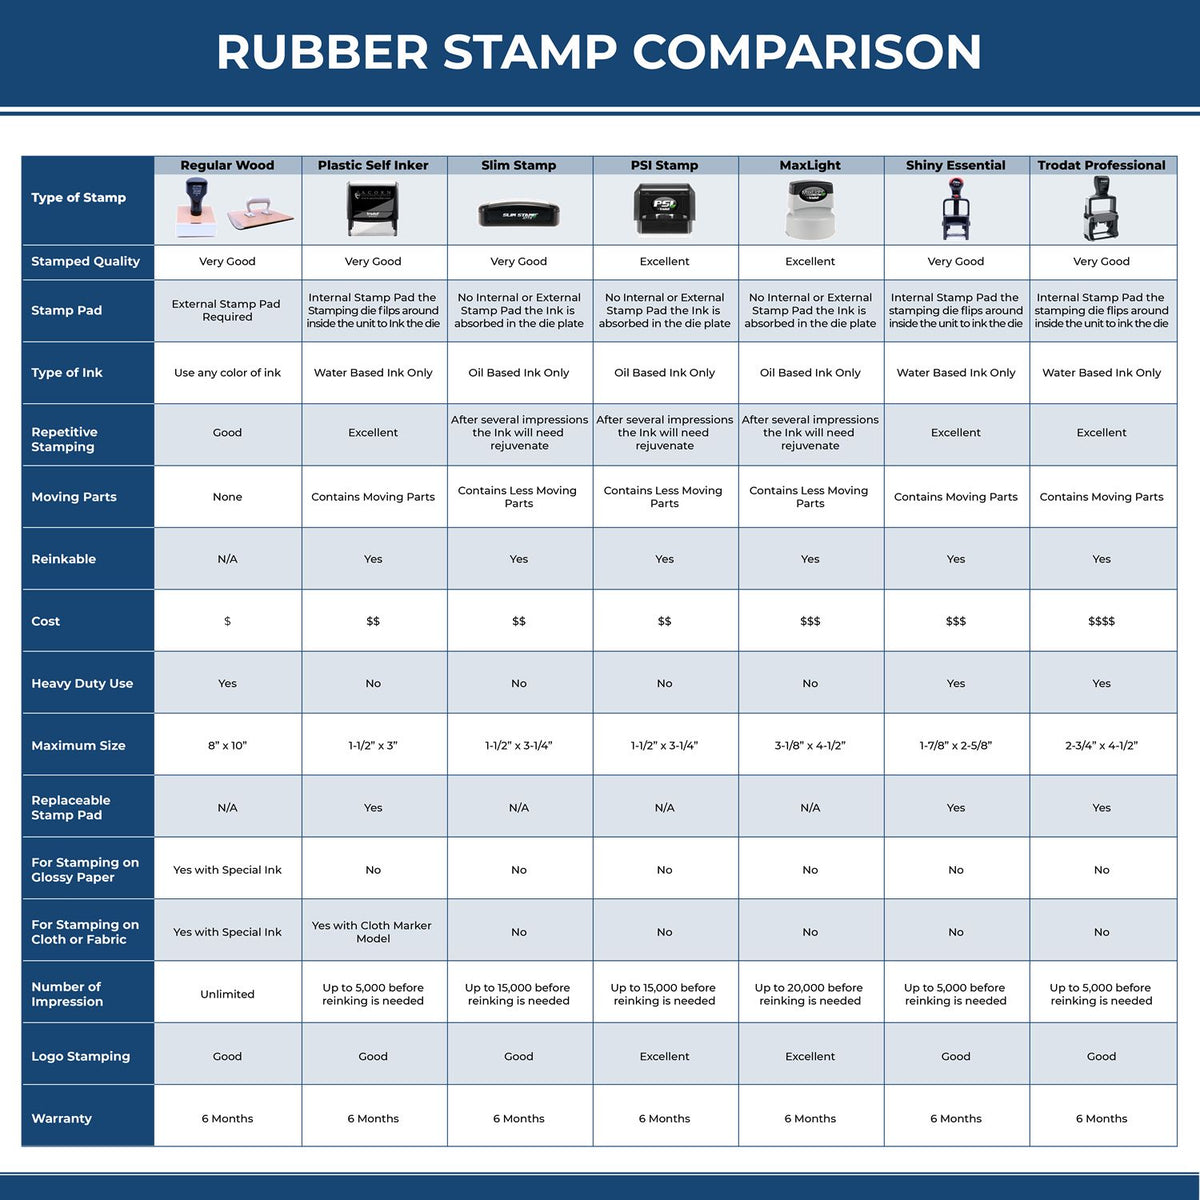 Large Received Unsealed Rubber Stamp 4960R Rubber Stamp Comparison